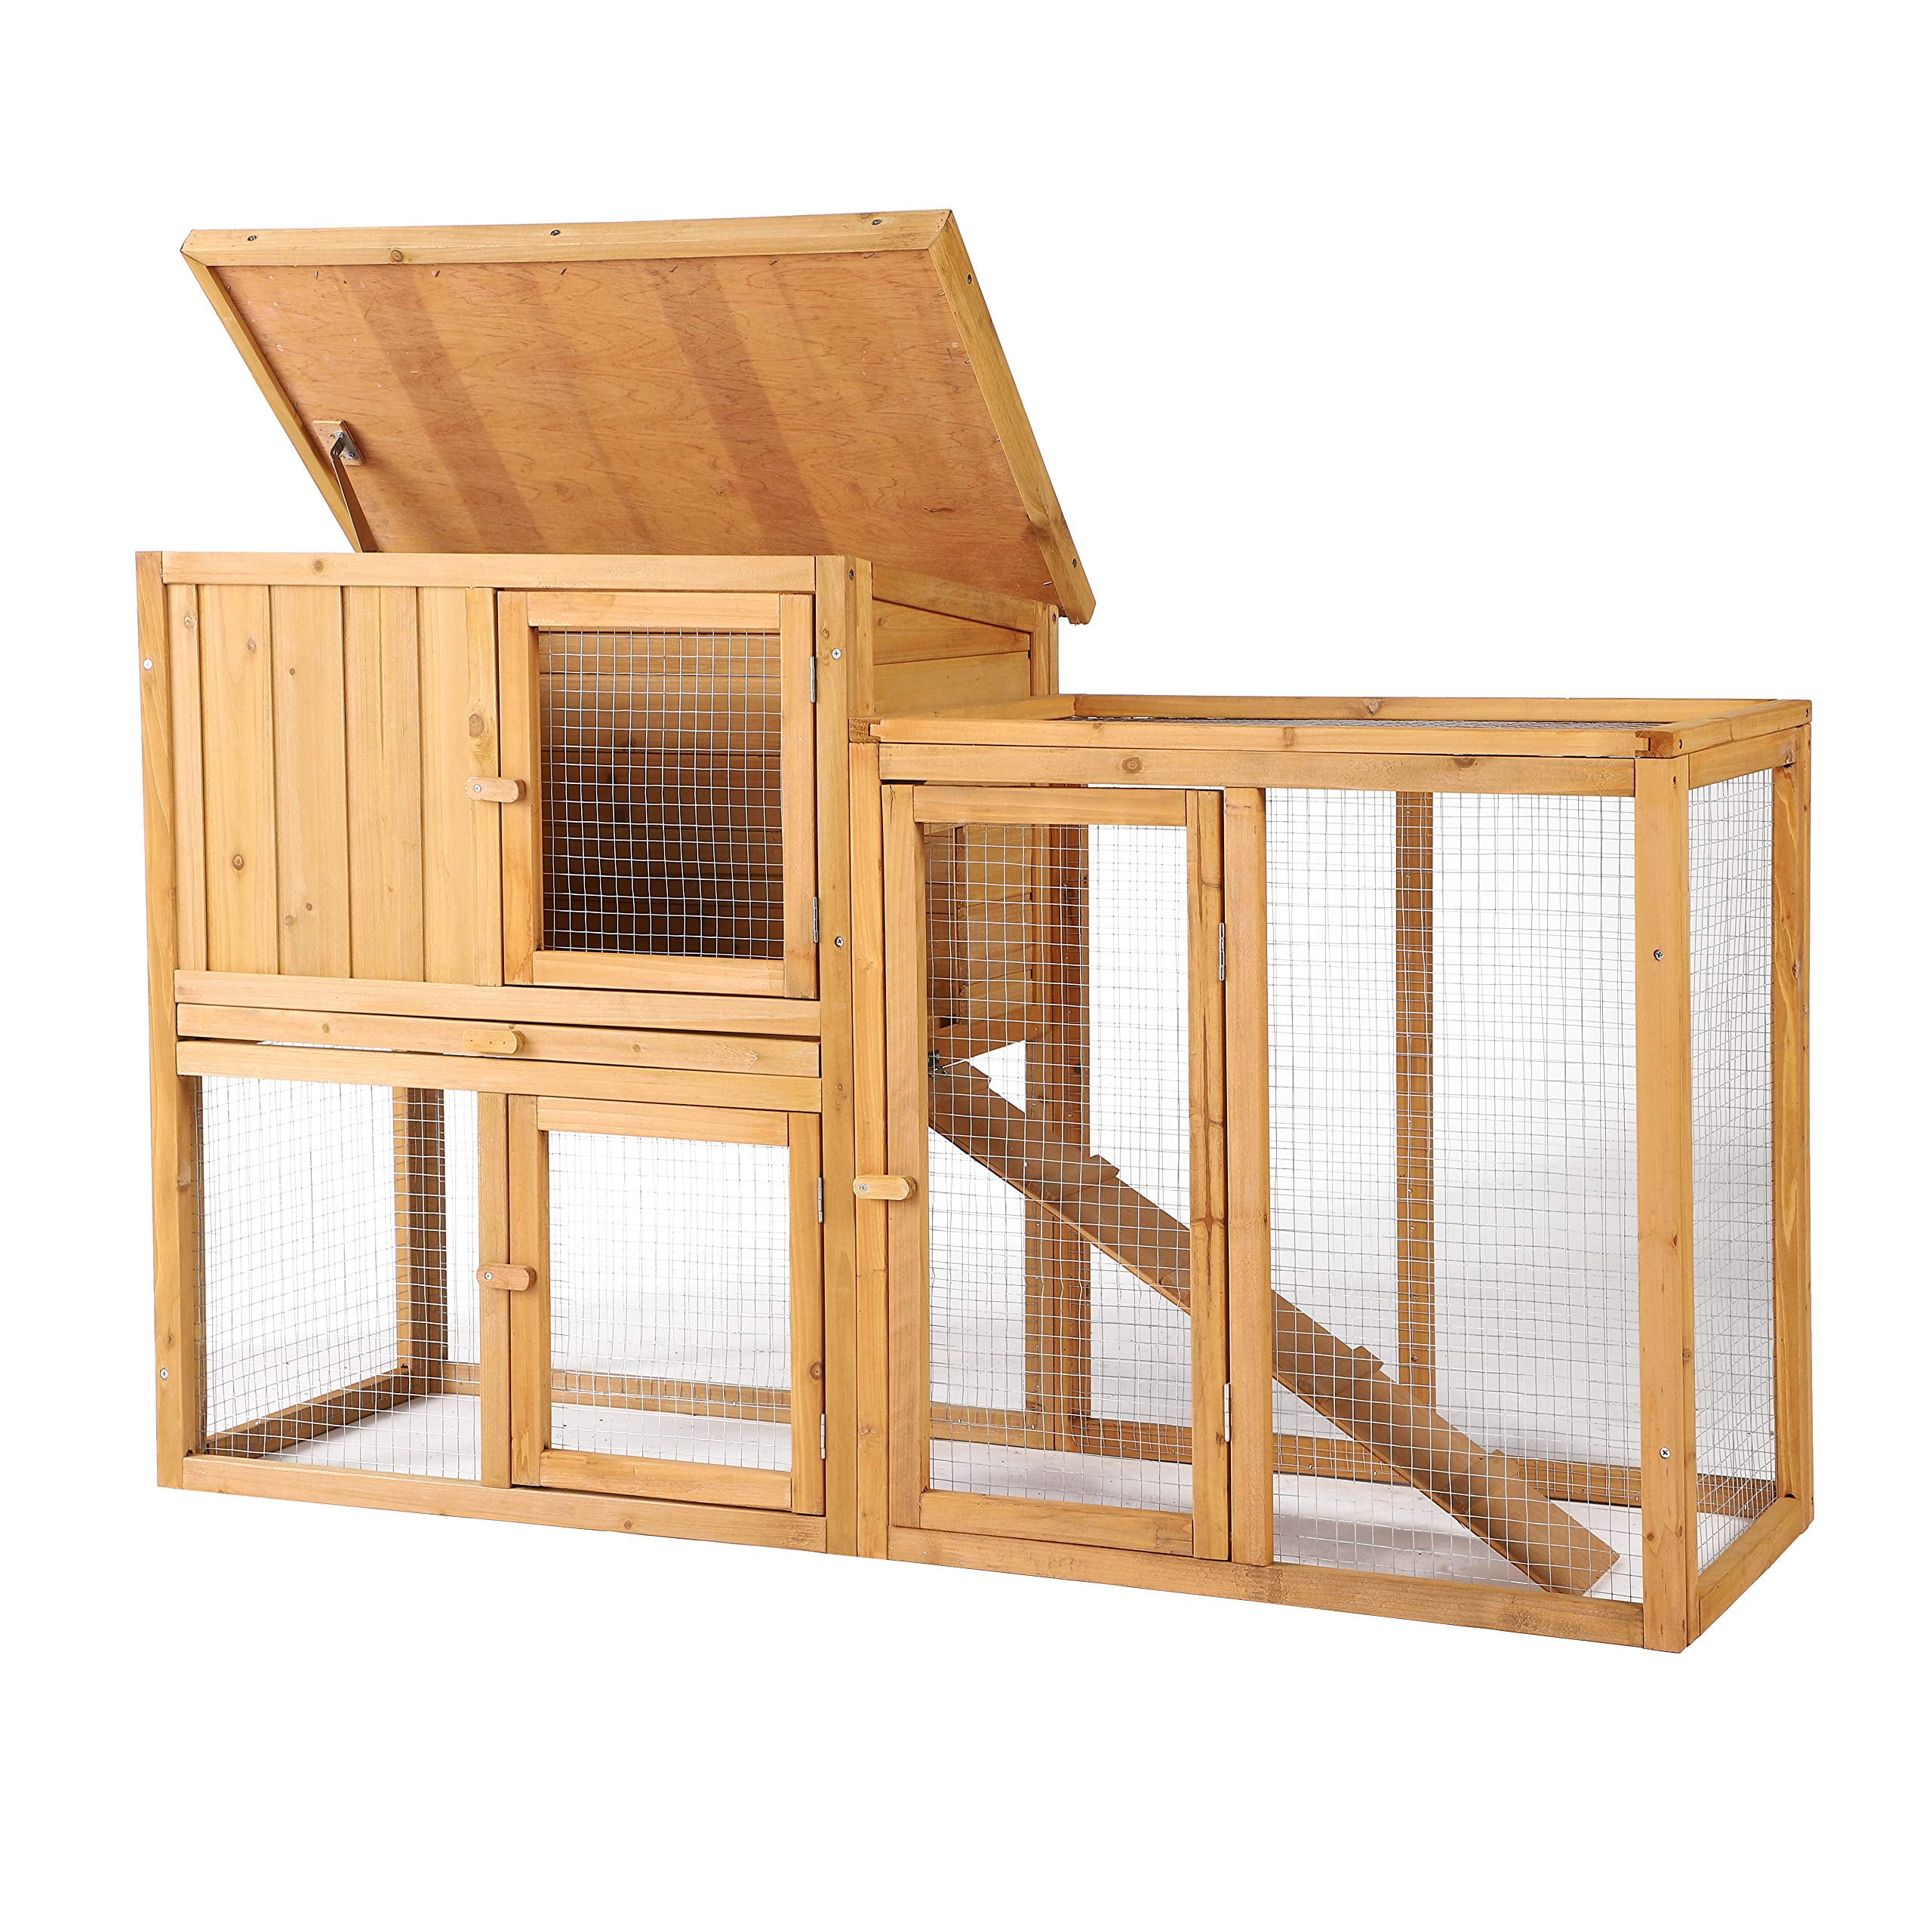 Removable Tray Bunny Cage for Small Animals Sunlight Panel Ramp Ventilation Door Wooden Bunny House Chicken House Coop with Weatherproof Asphalt Roof Bunny Cage for Rabbits Indoor and Outdoor 